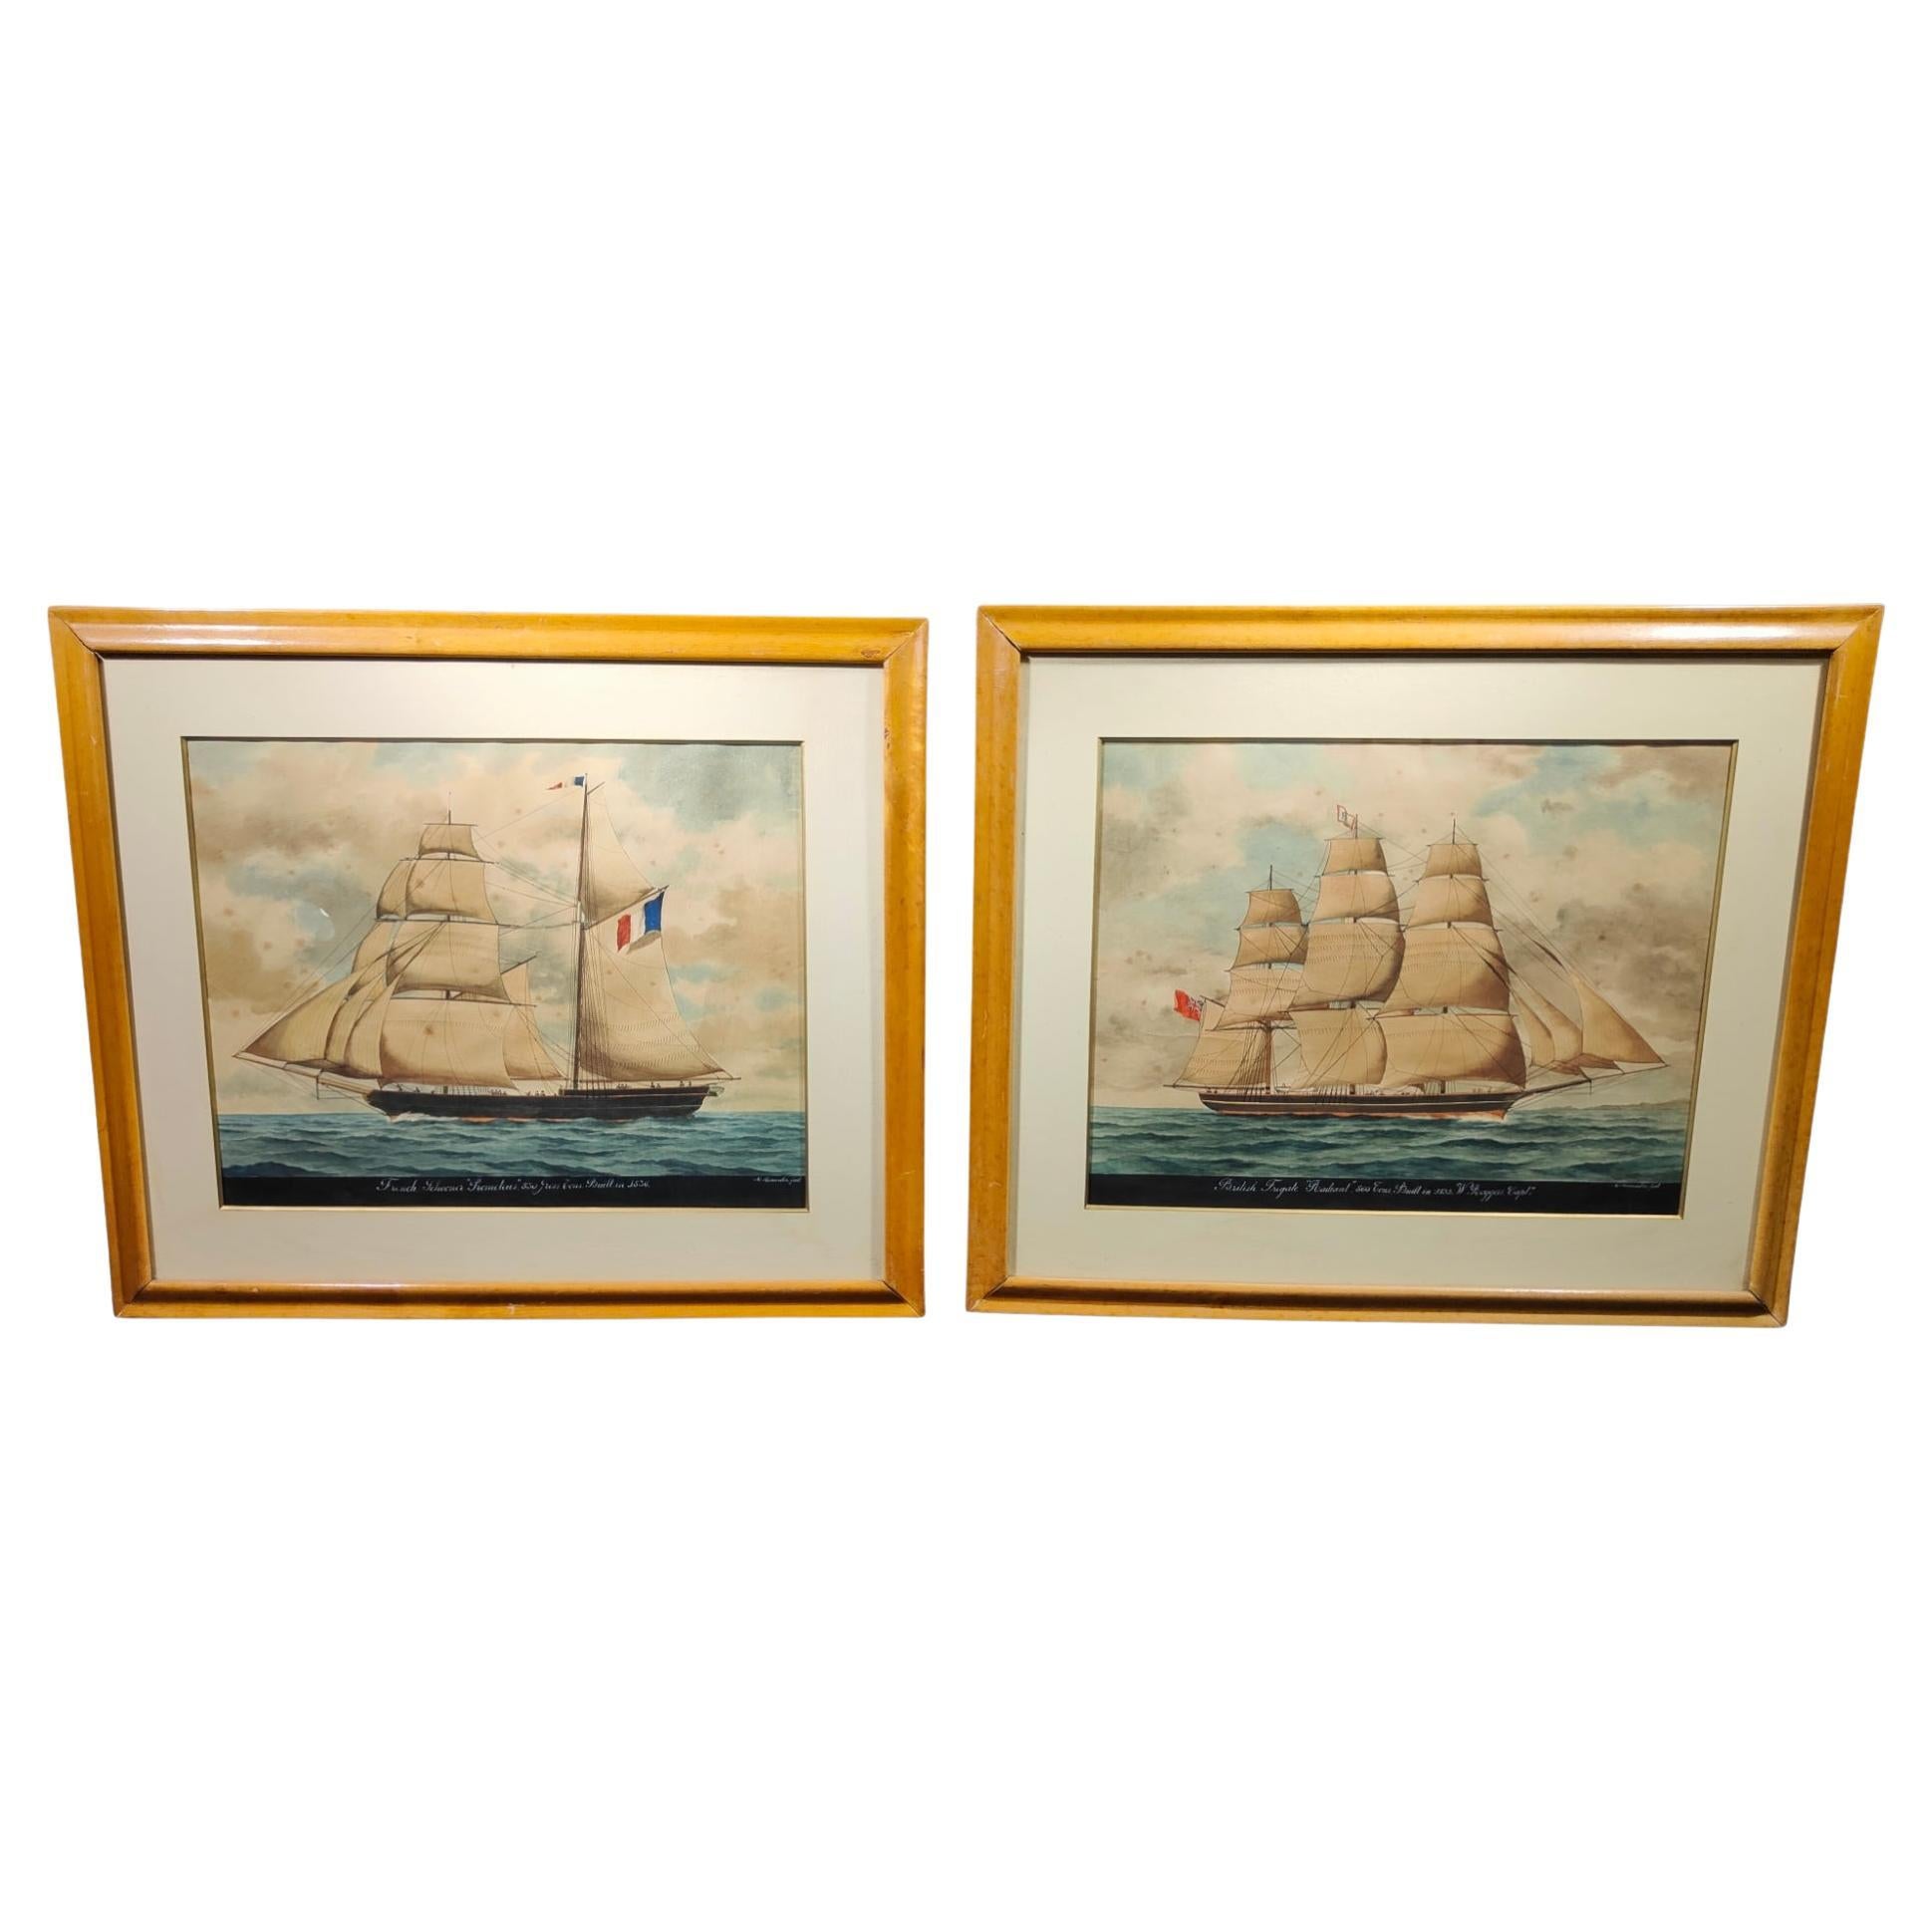 Pair of Antique Watercolors with Boats from XIXth